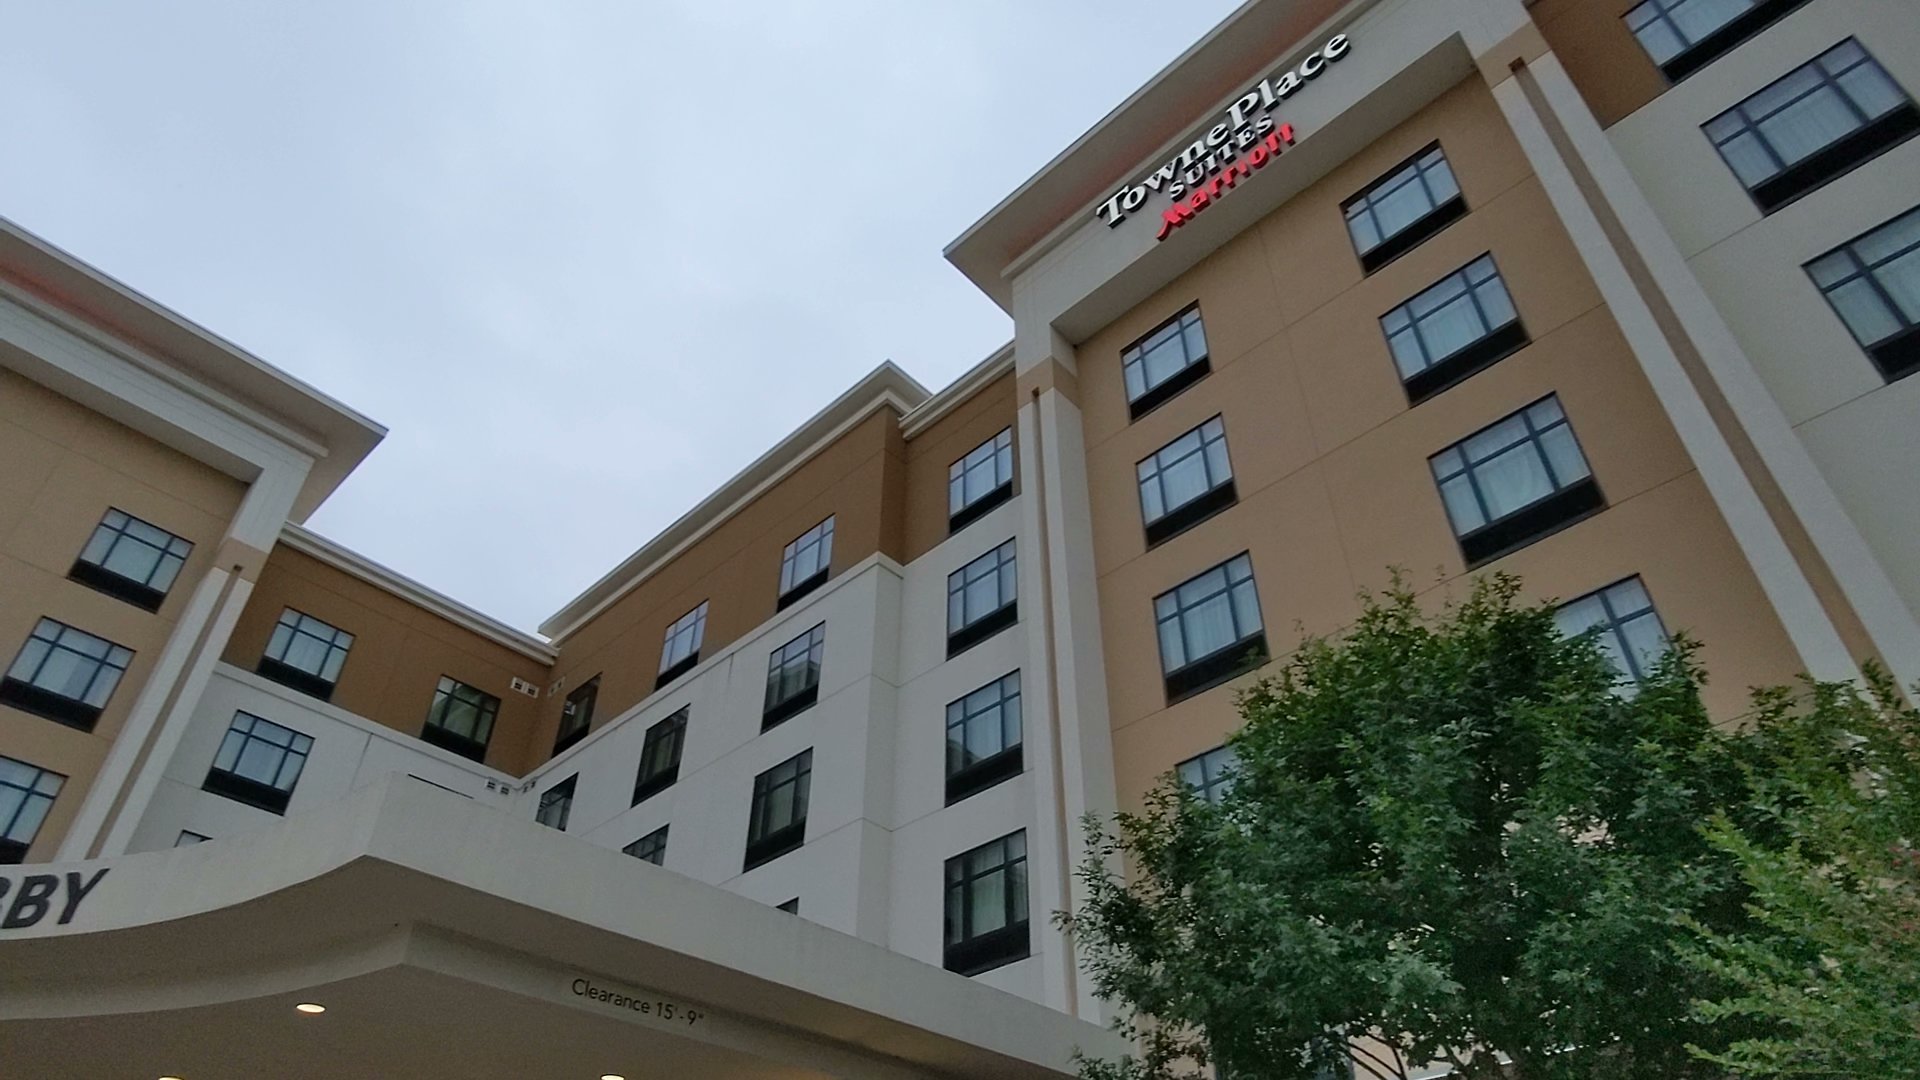 TownePlace Suites by Marriott Dallas DFW Airport North/Grapevine